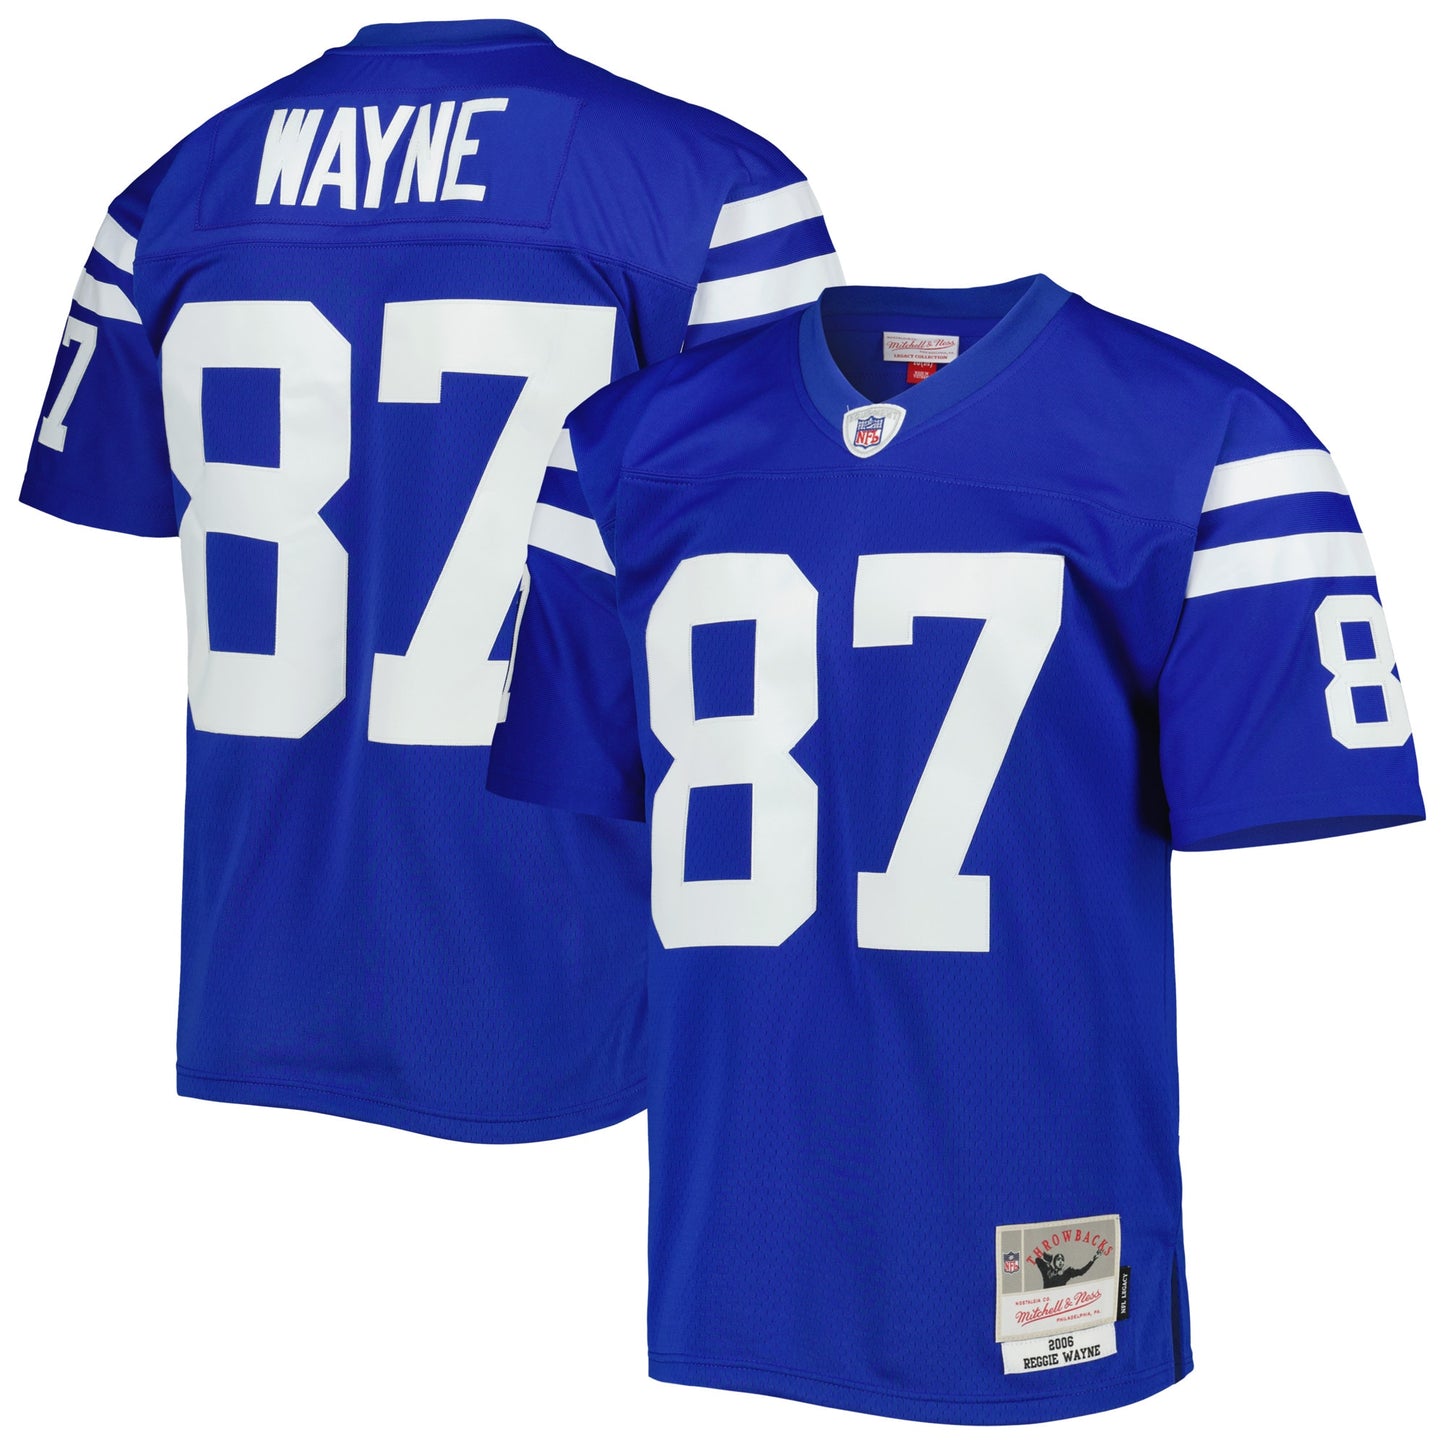 Reggie Wayne Indianapolis Colts Mitchell & Ness Legacy Replica Jersey - Royal